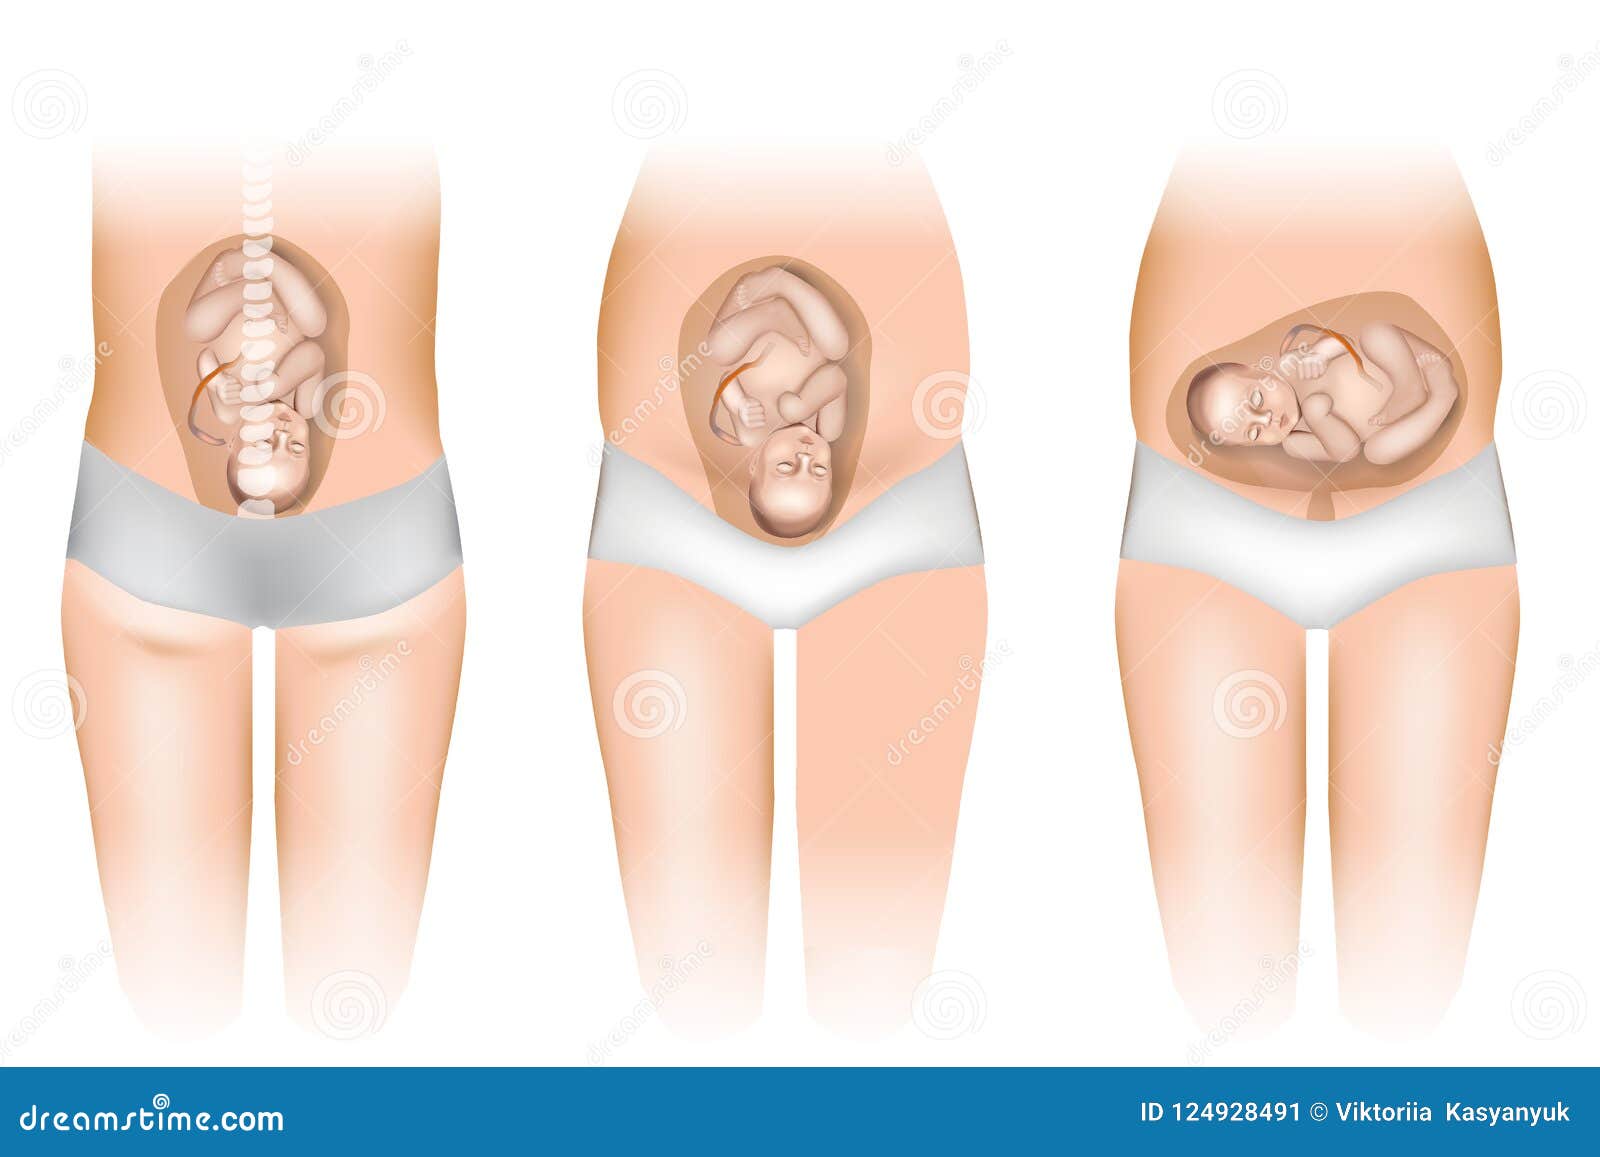 different positions of baby in the womb.